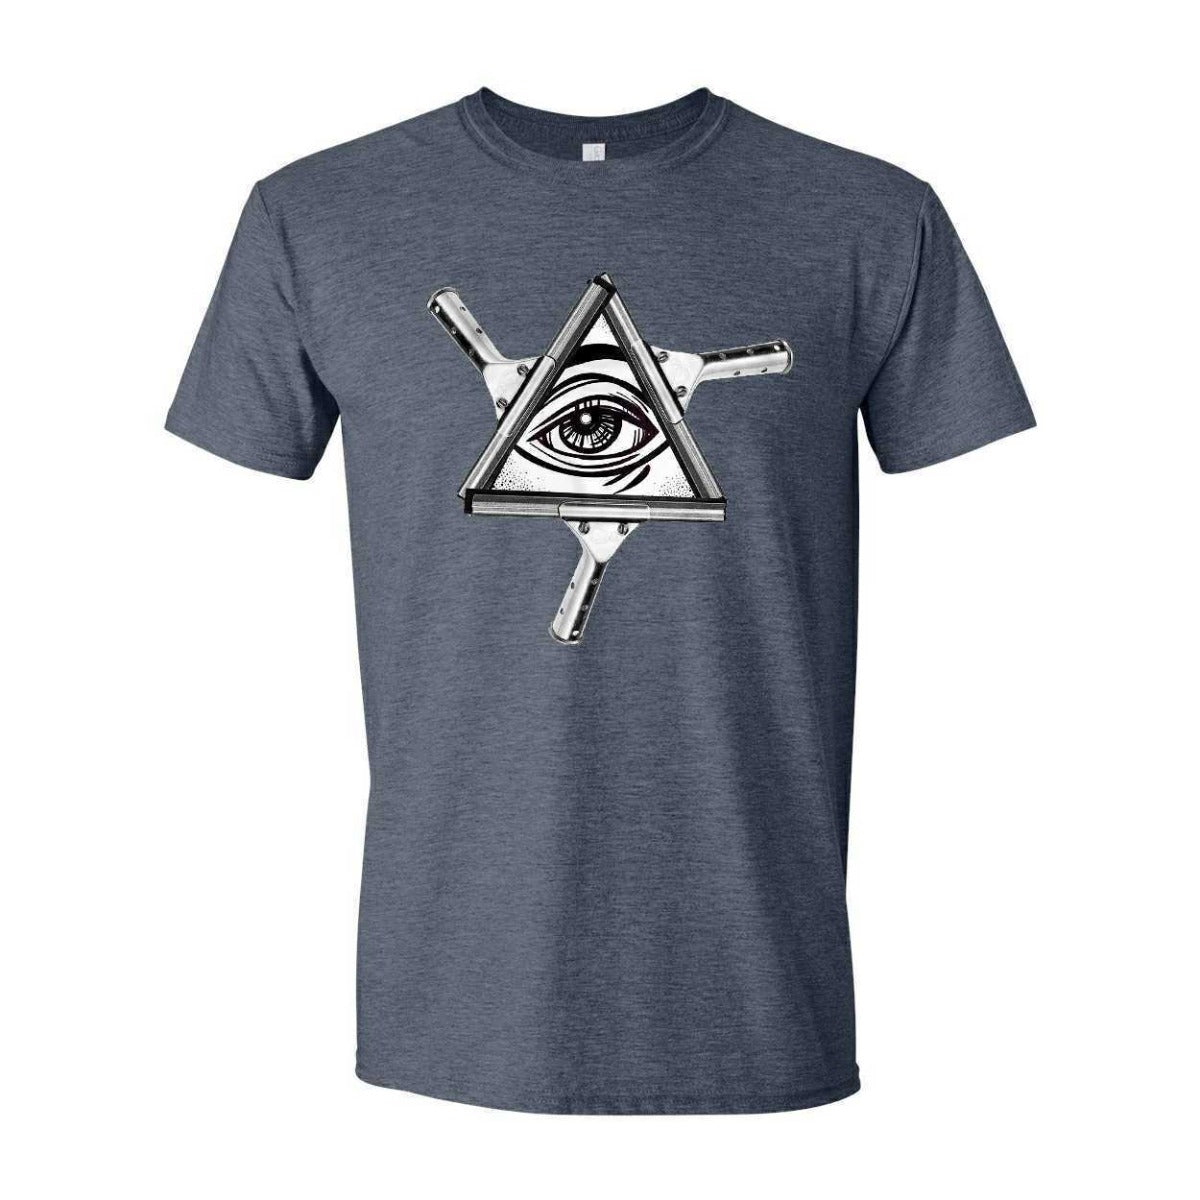 Squeegee Life Sacred Eye Design T-Shirt Front View